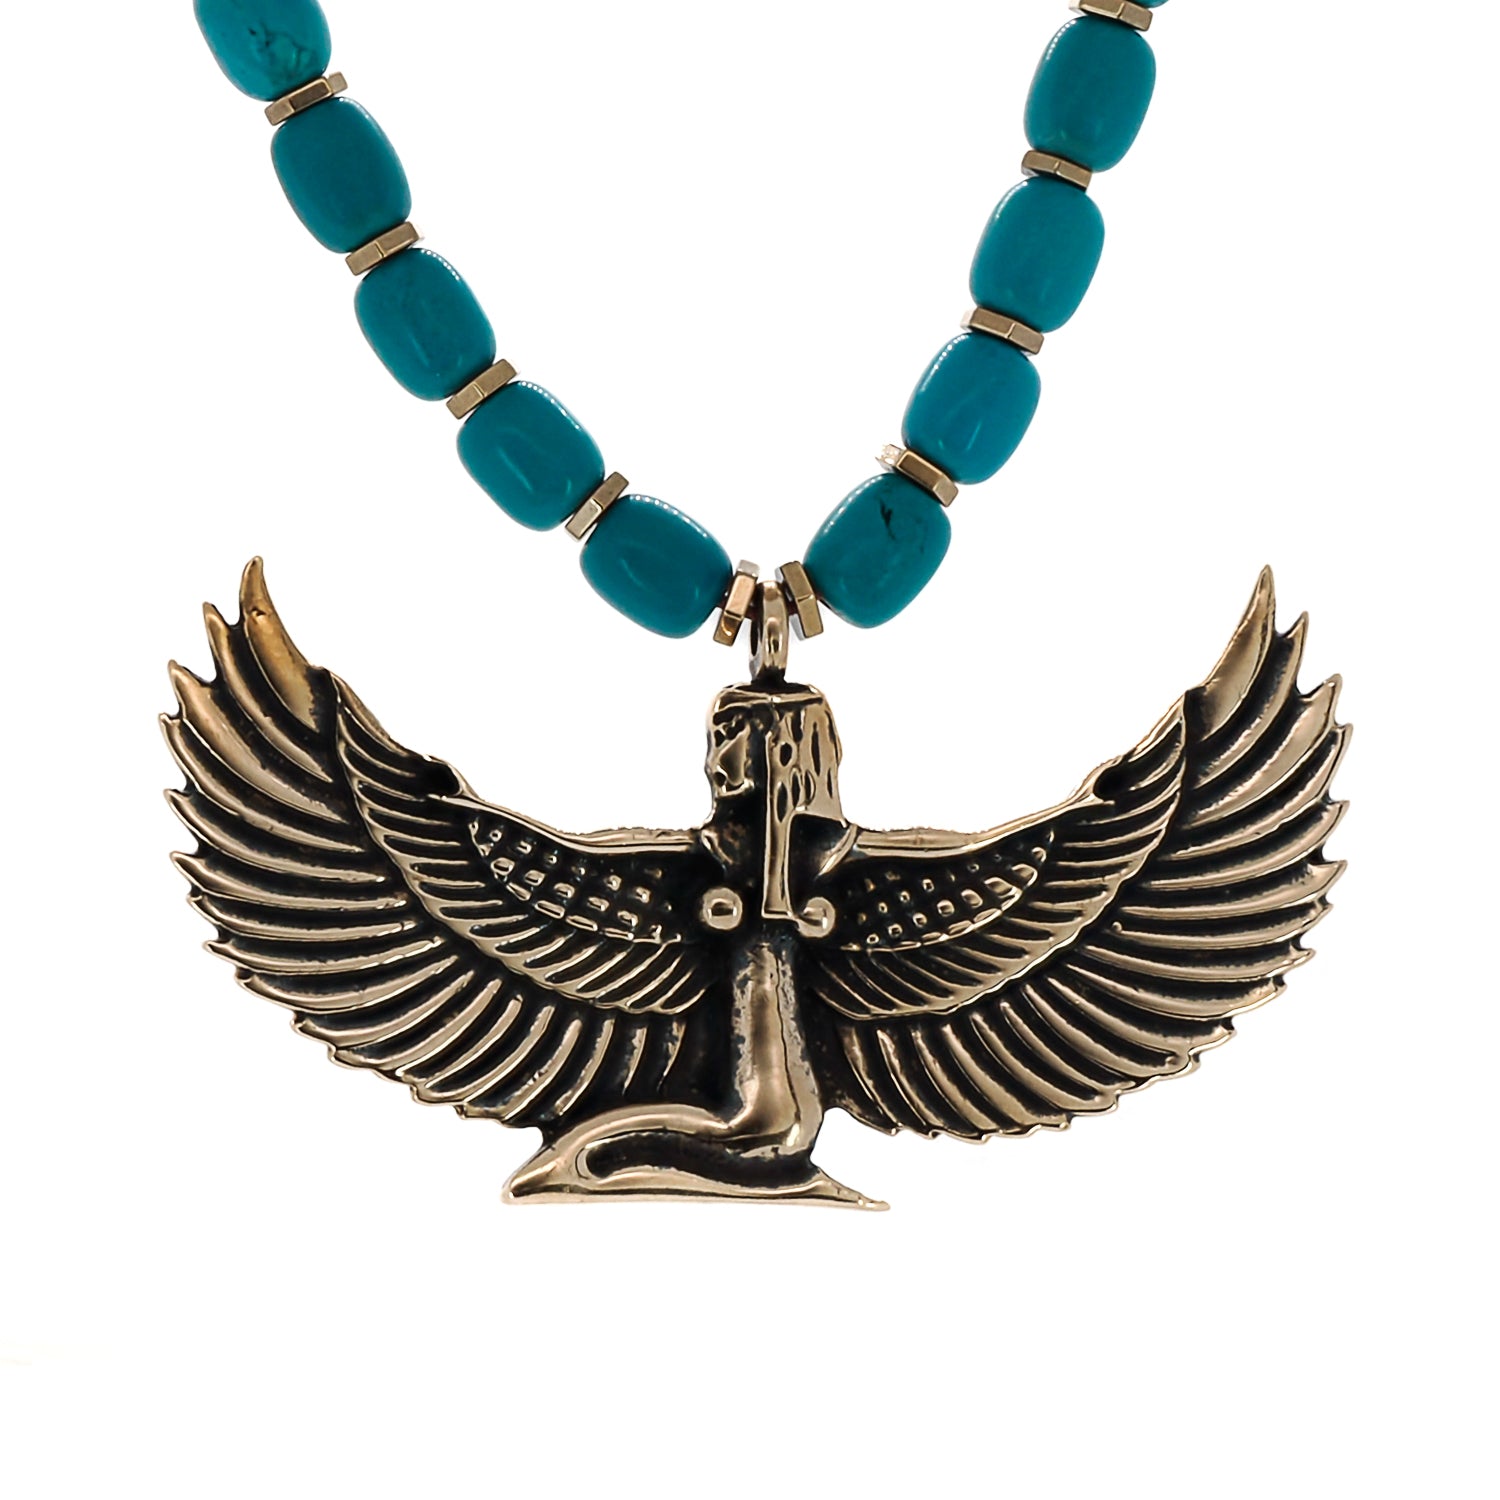 Spiritual Elegance - A wearable tribute to the goddess Isis.